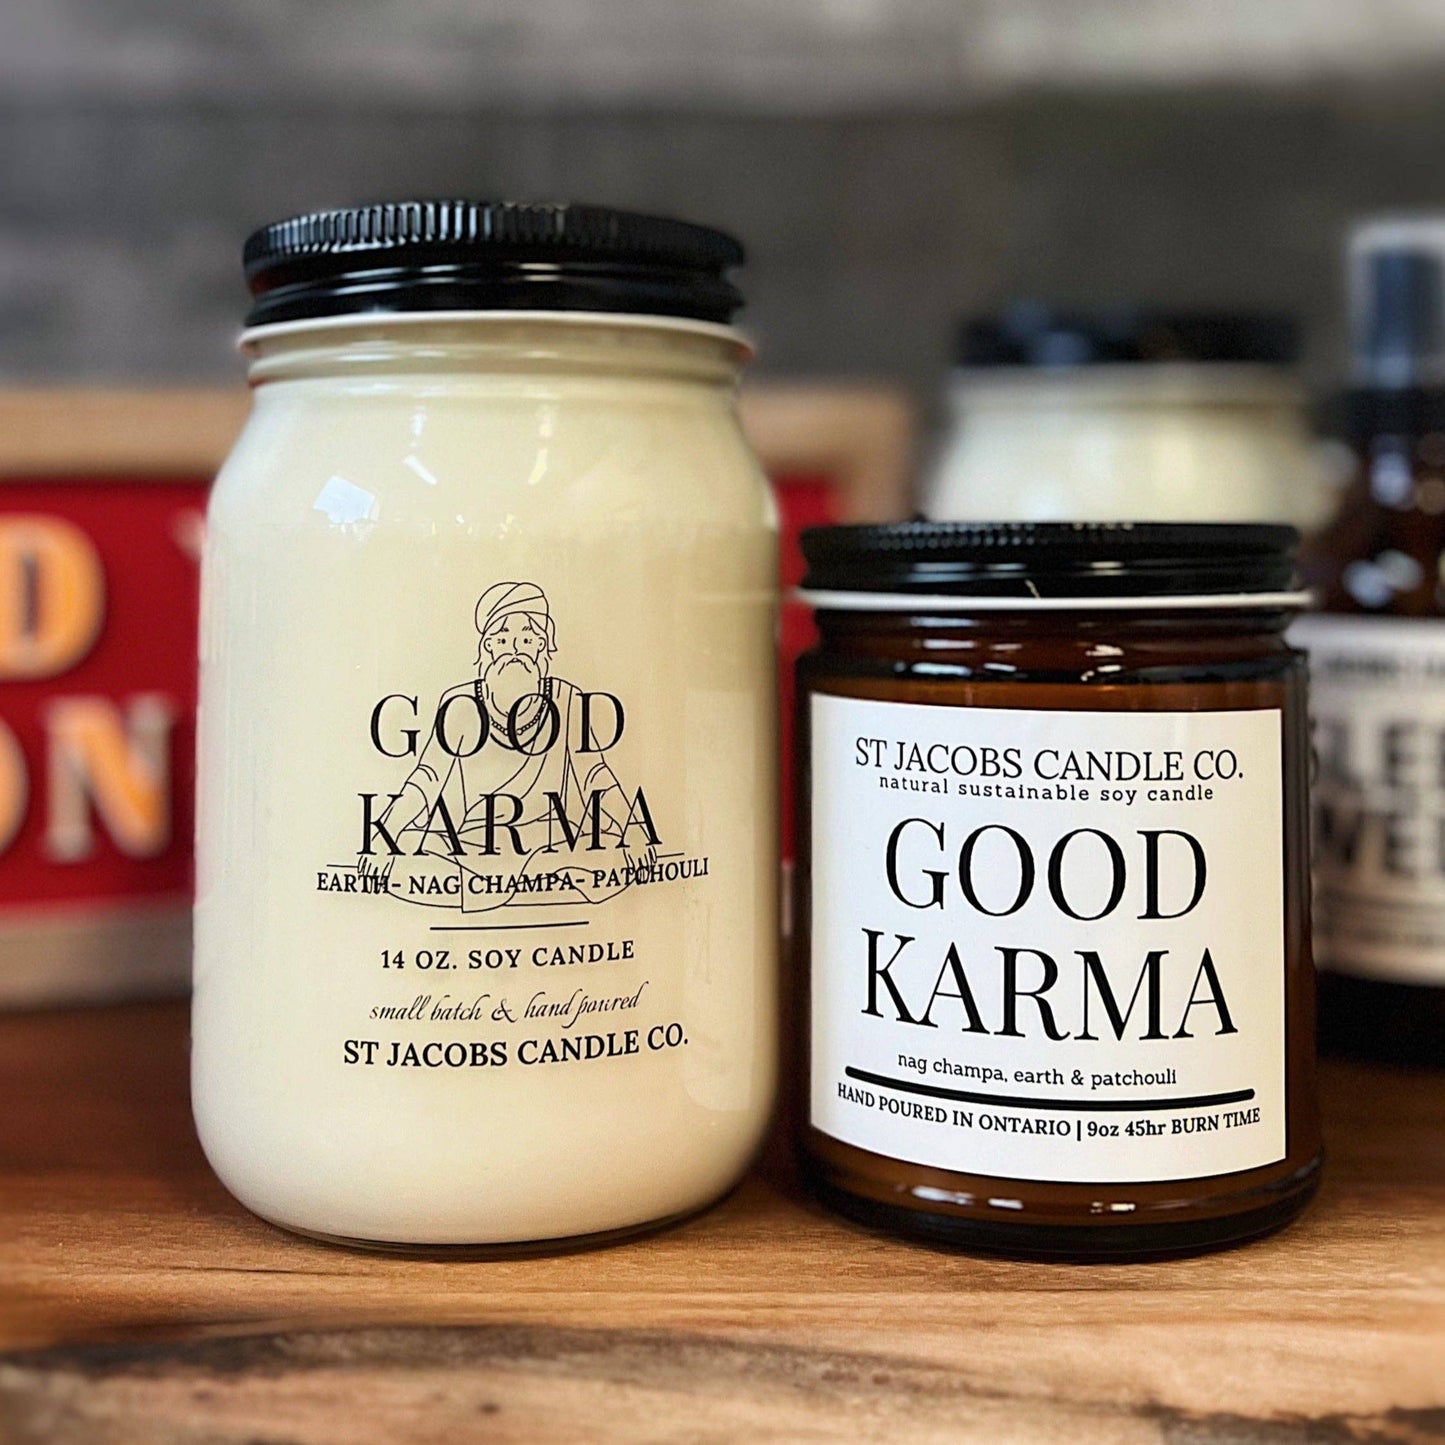 St Jacobs Candle Co. - "GOOD KARMA" Natural Soy Wax Candle